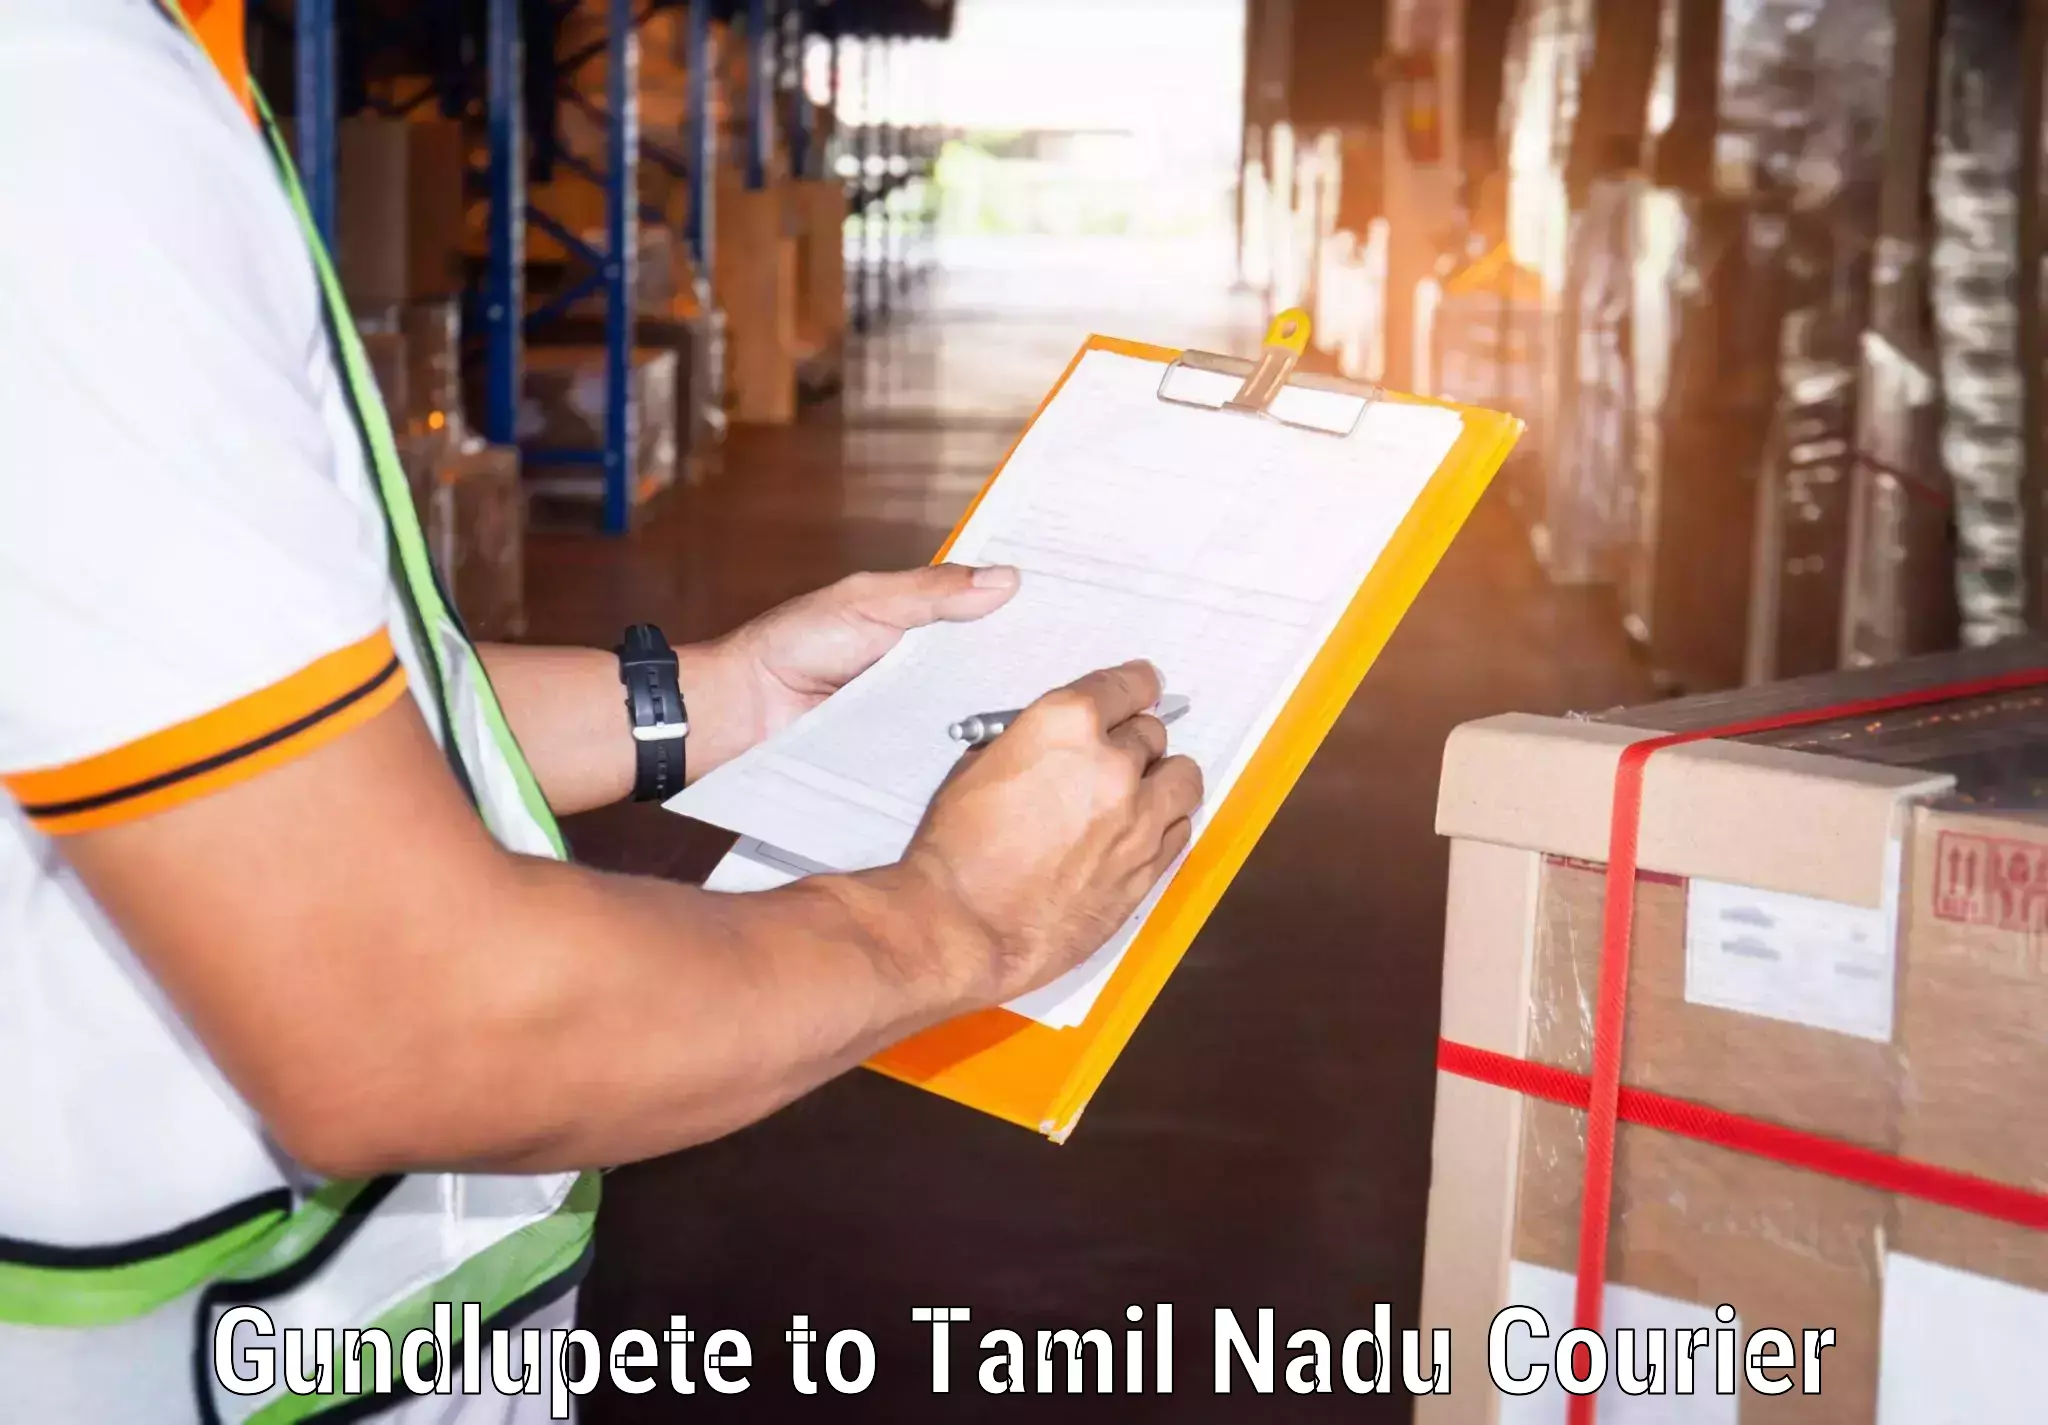 Next day courier Gundlupete to Dindigul